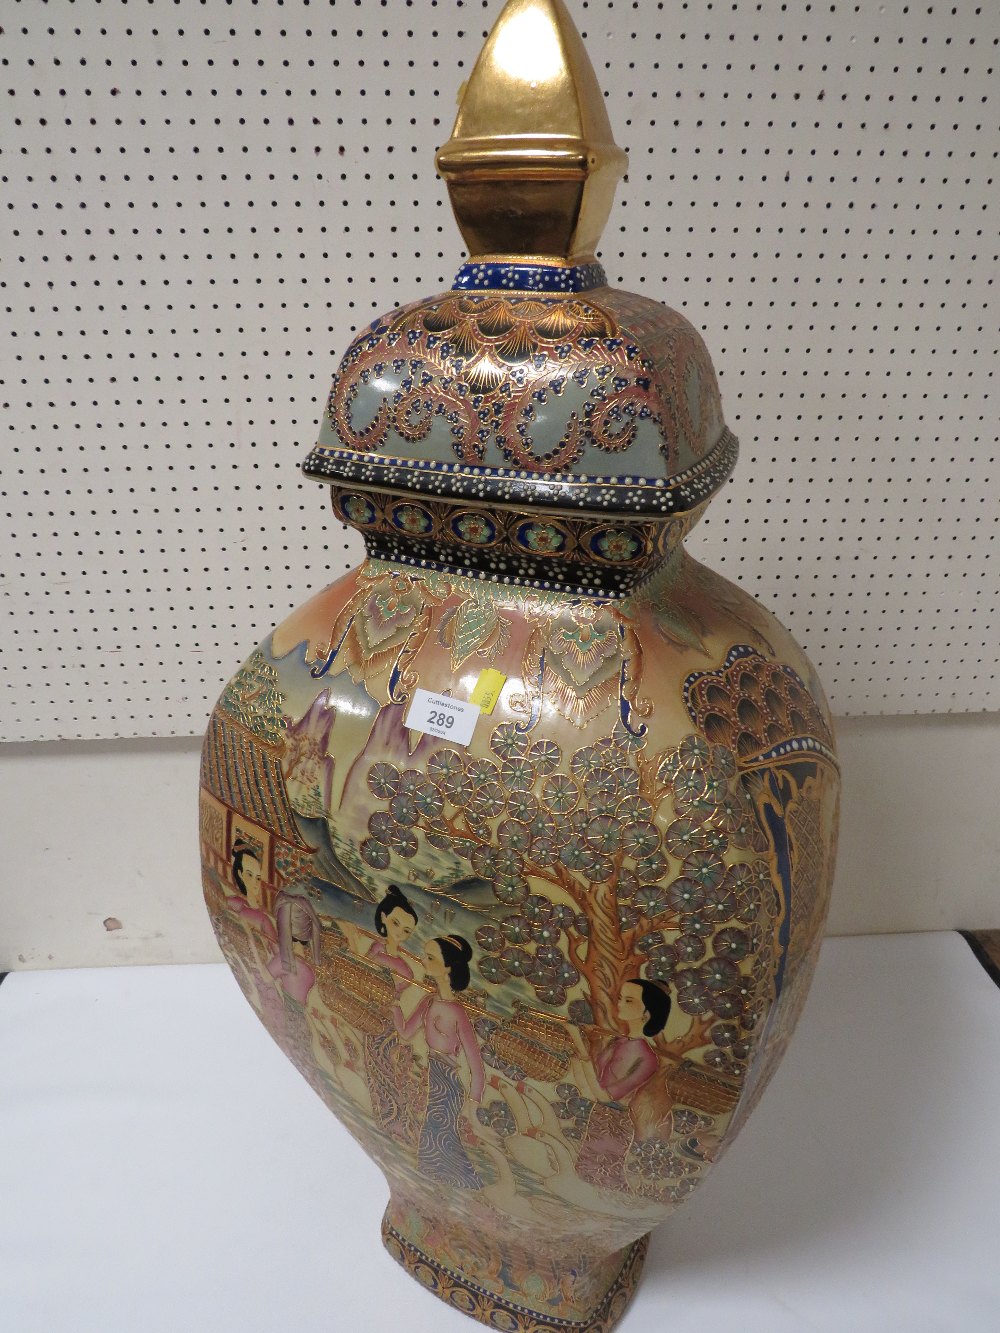 A LARGE DECORATIVE ORIENTAL VASE TOGETHER WITH A PAIR OF BINOCULARS - Image 4 of 8